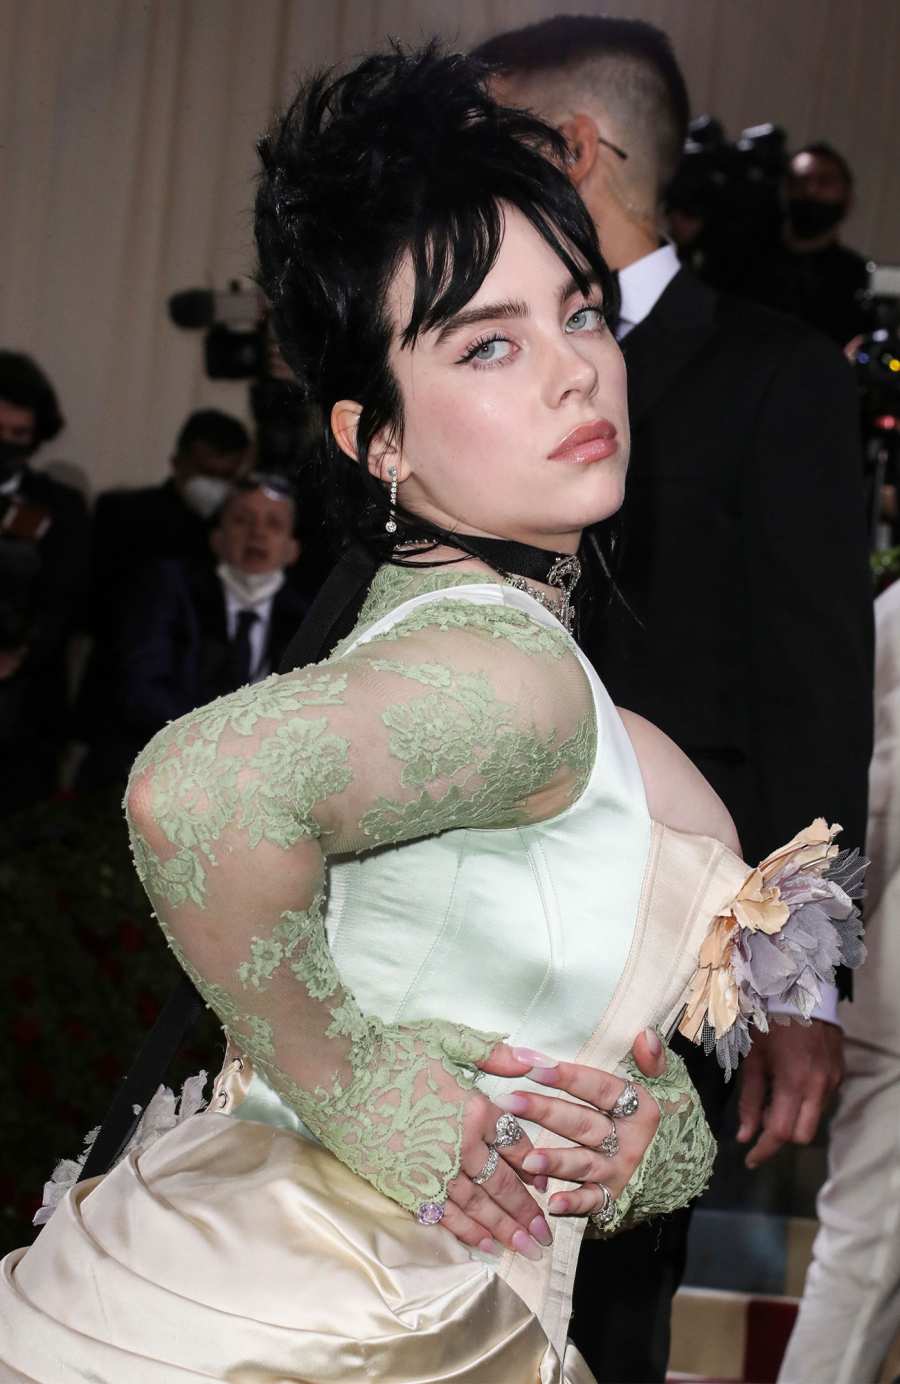 2nd Time Around! Billie Eilish Wows With Her 'Eco-Friendly' Met Gala Outfit